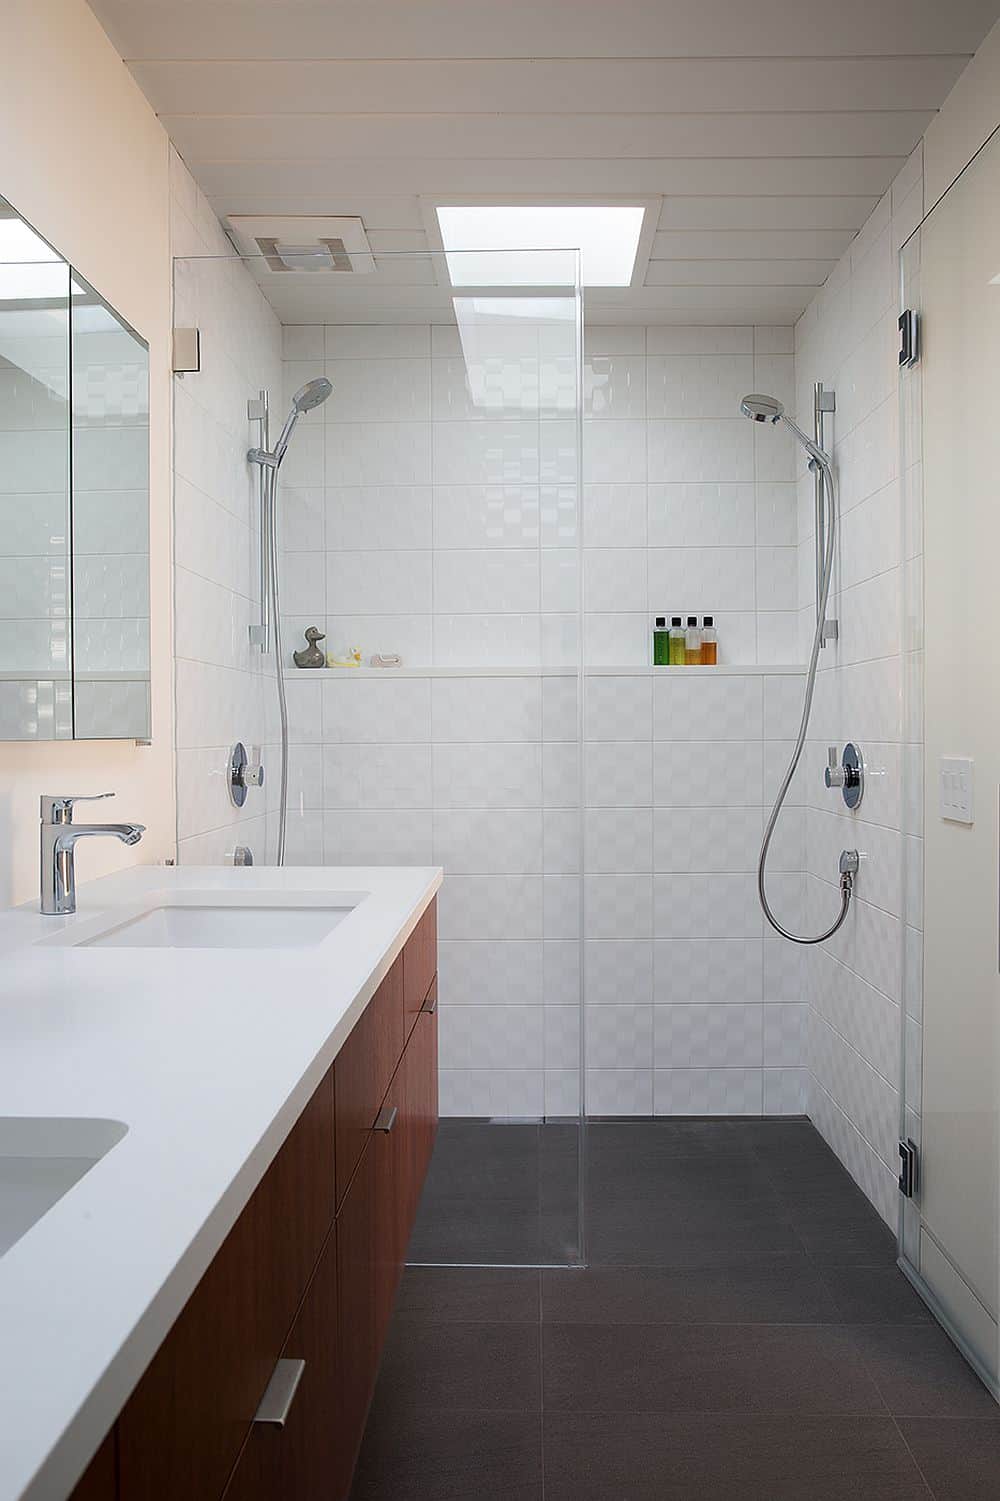 Bathroom is finished with textured white tiles while wooden vanity echoes the main theme